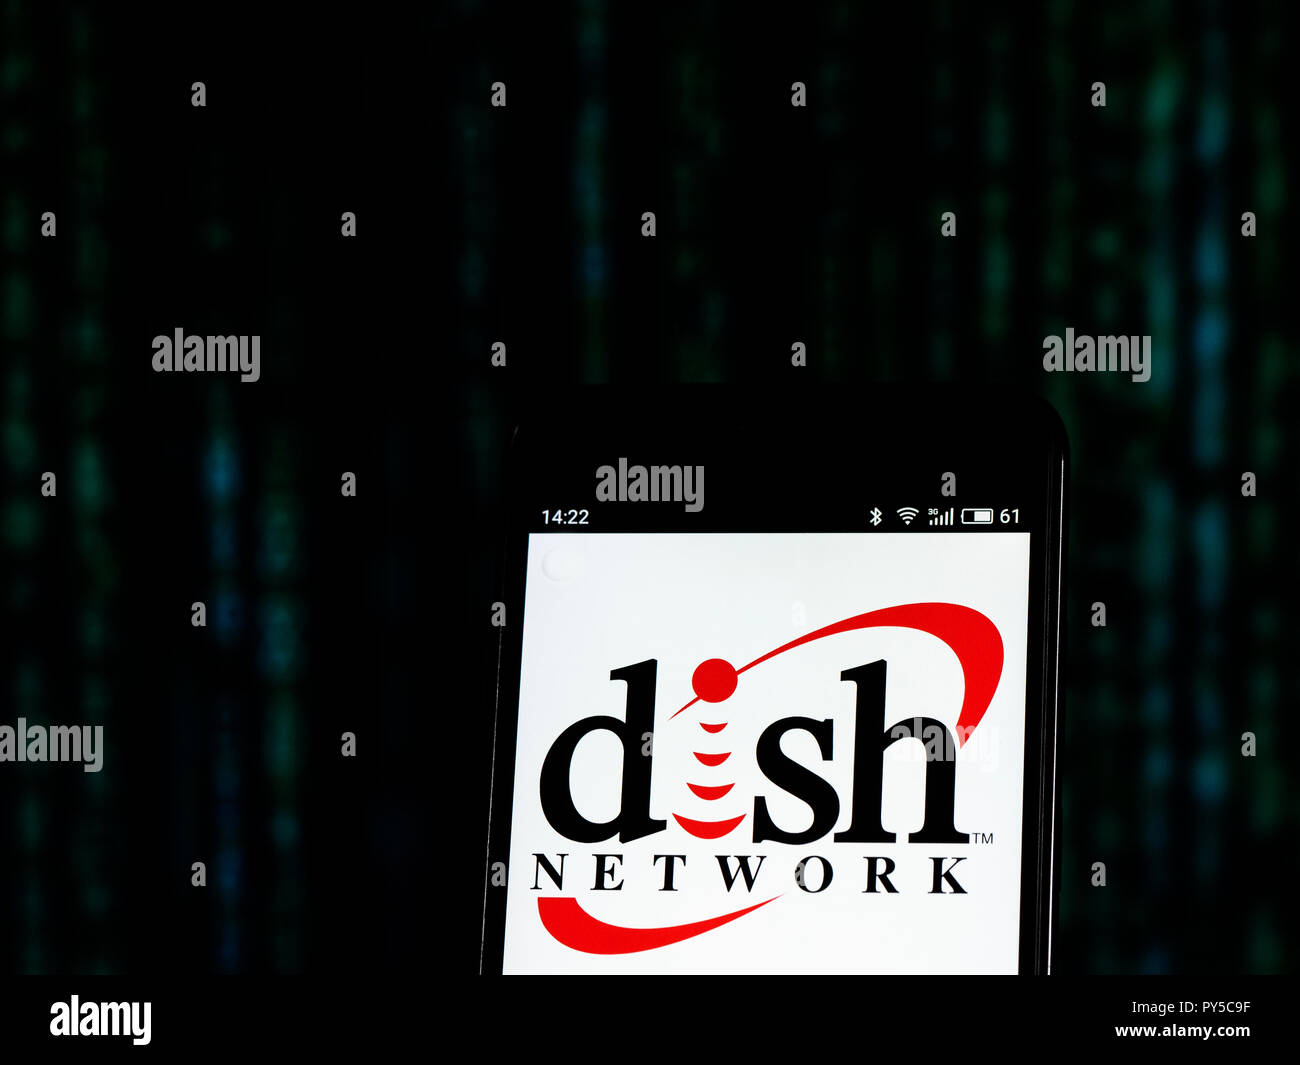 Dish Network Satellite television company logo seen displayed on smart phone. Dish Network Corporation is a U.S. television provider. t is the owner of the direct-broadcast satellite provider Dish, and the over-the-top IPTV service Sling TV. As of November 2016, the company provided services to 13.7 million television and 580,000 broadband subscribers. Stock Photo